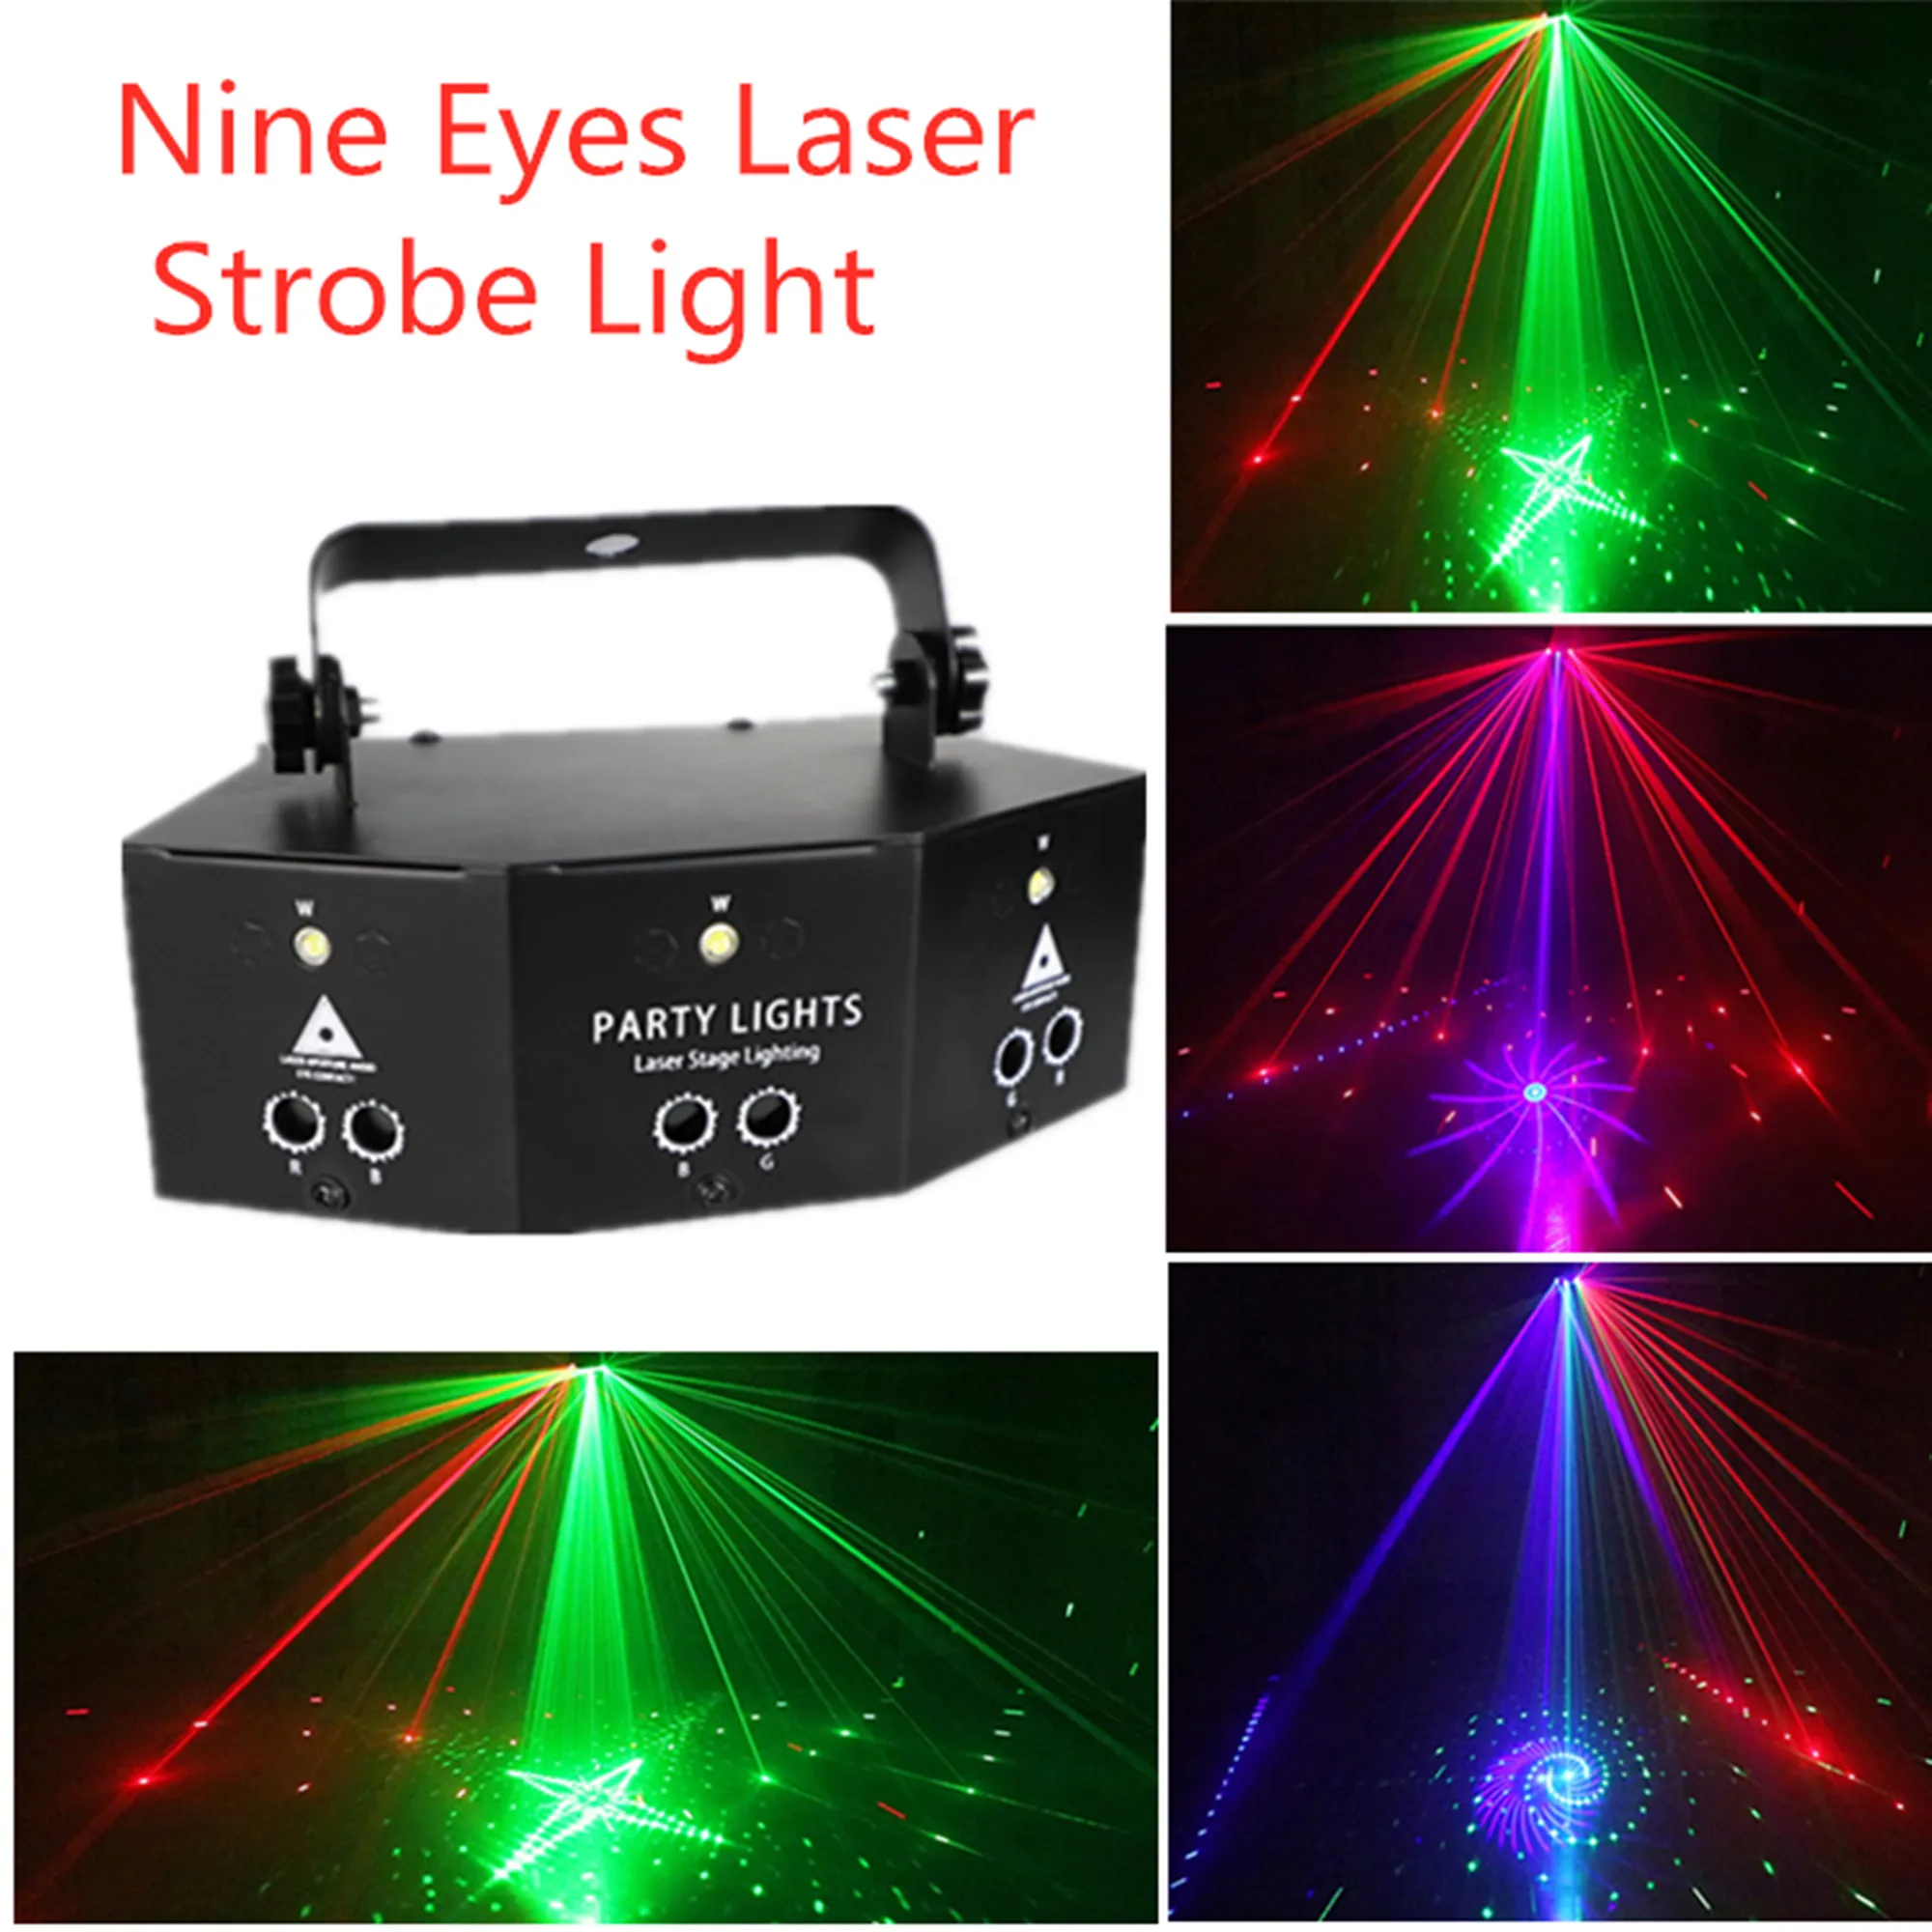 DMX Laser Projection Lamp 9 Eyes Laser Strobe Pattern Remote RGB Night Headlight Projector Light for Dj Disco Club Stage Party